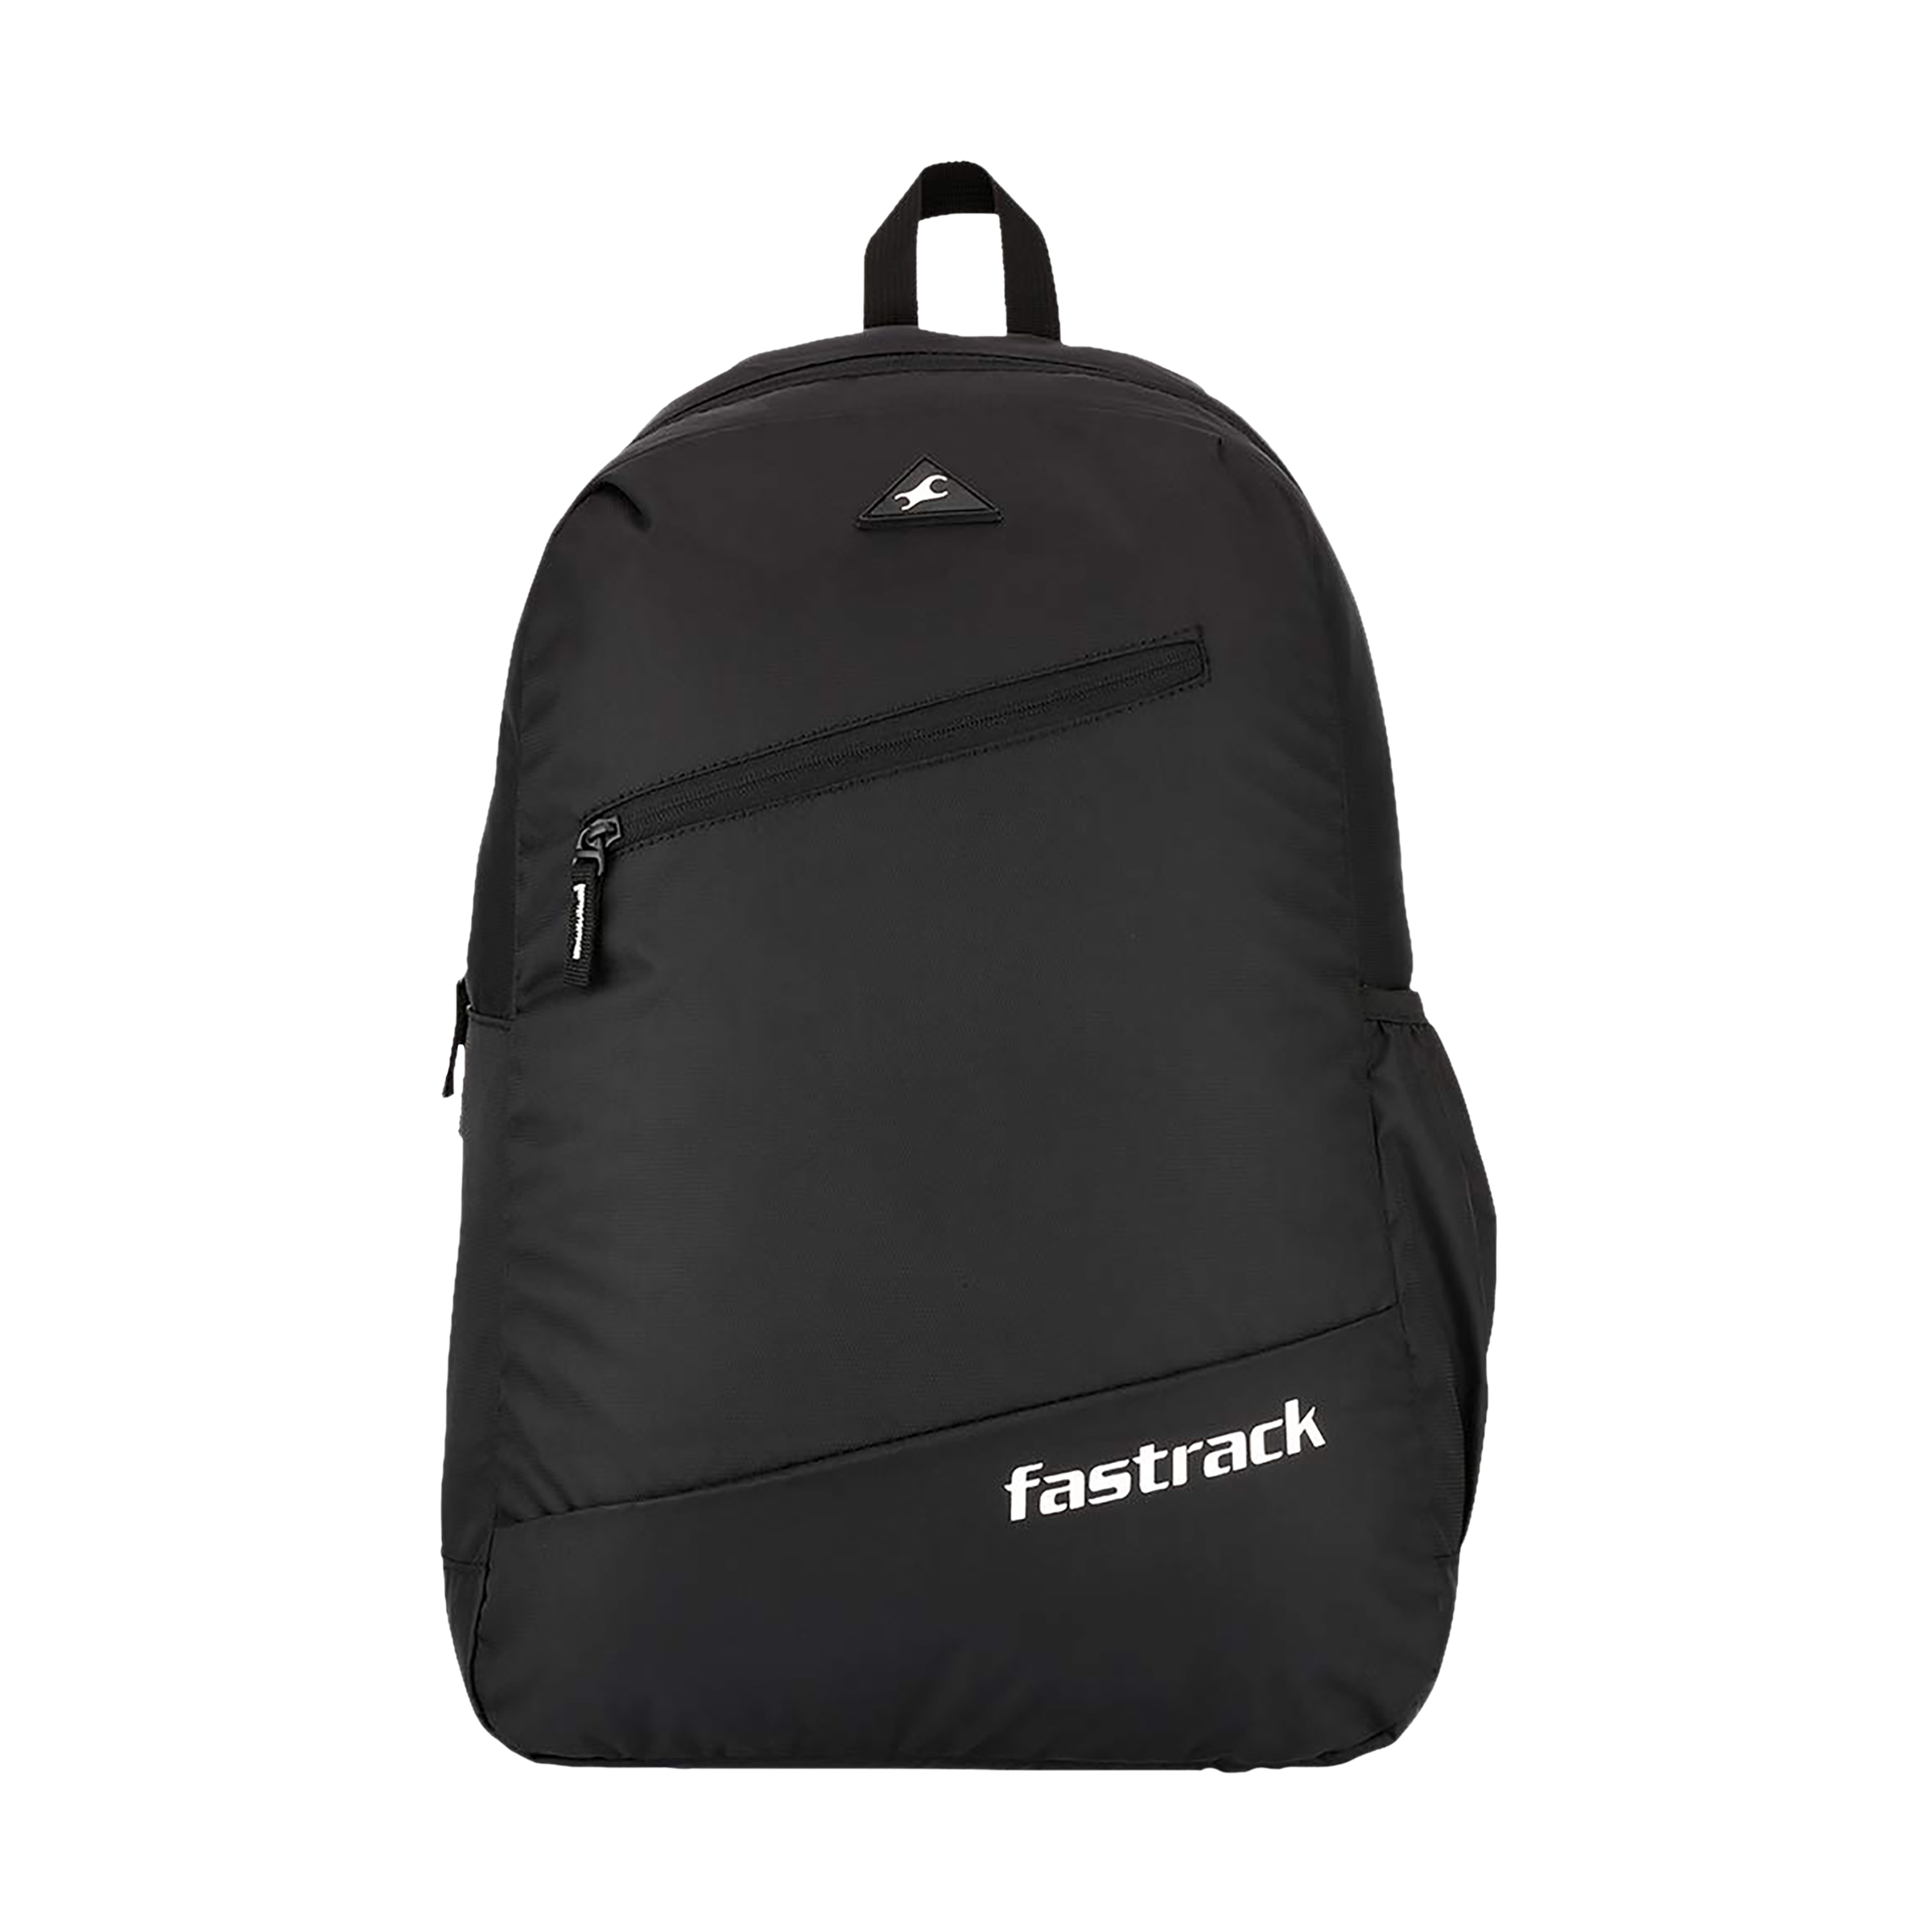 Fastrack Blue Pacer Backpack in Lucknow at best price by Ramsha Bag House   Justdial